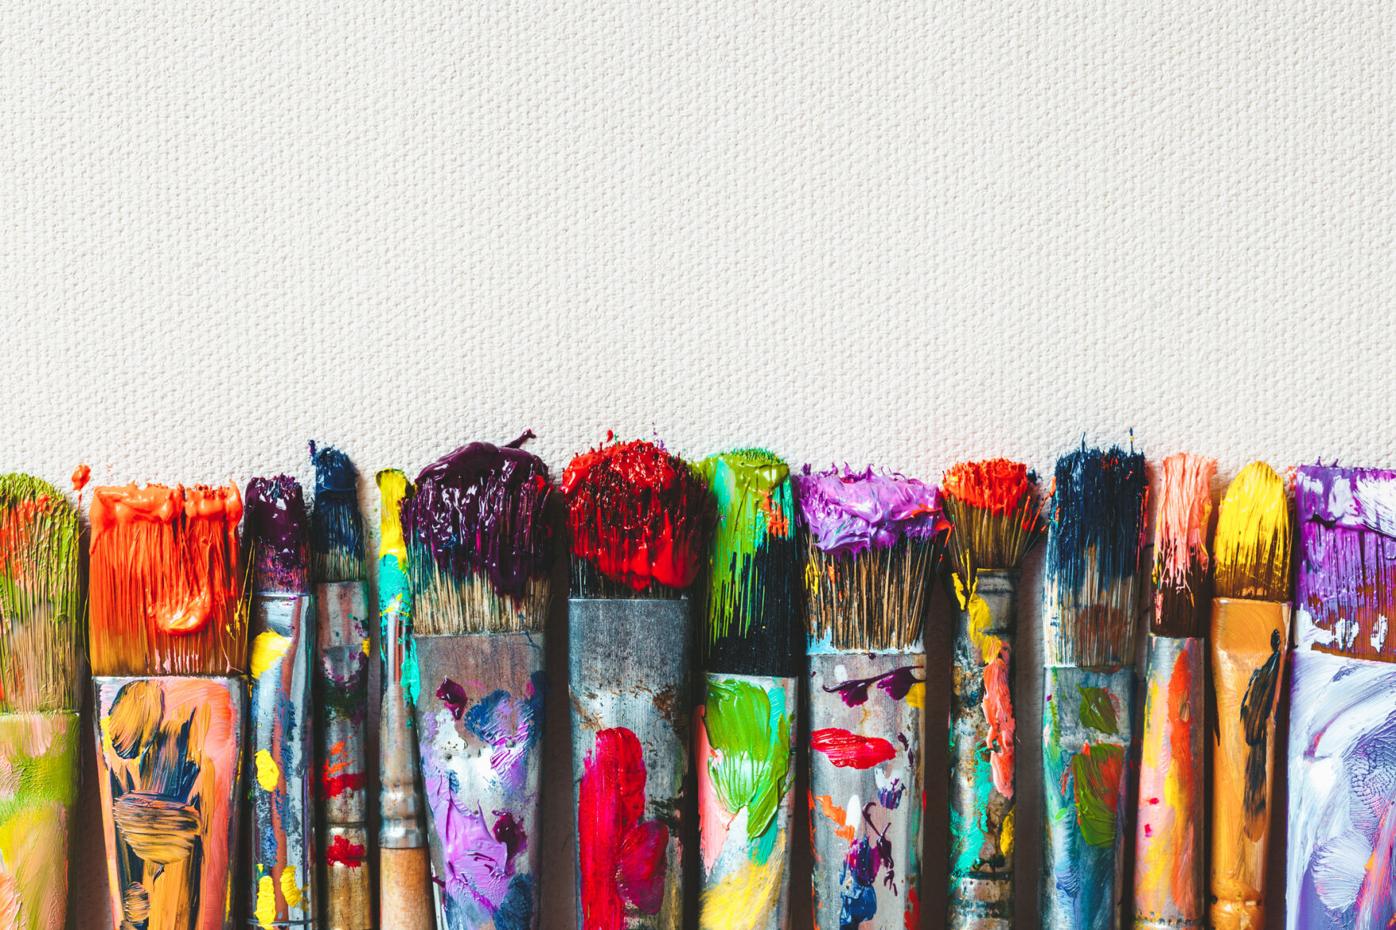 Row Artists Paintbrushes Against Natural Canvas Stock Photo 49215382